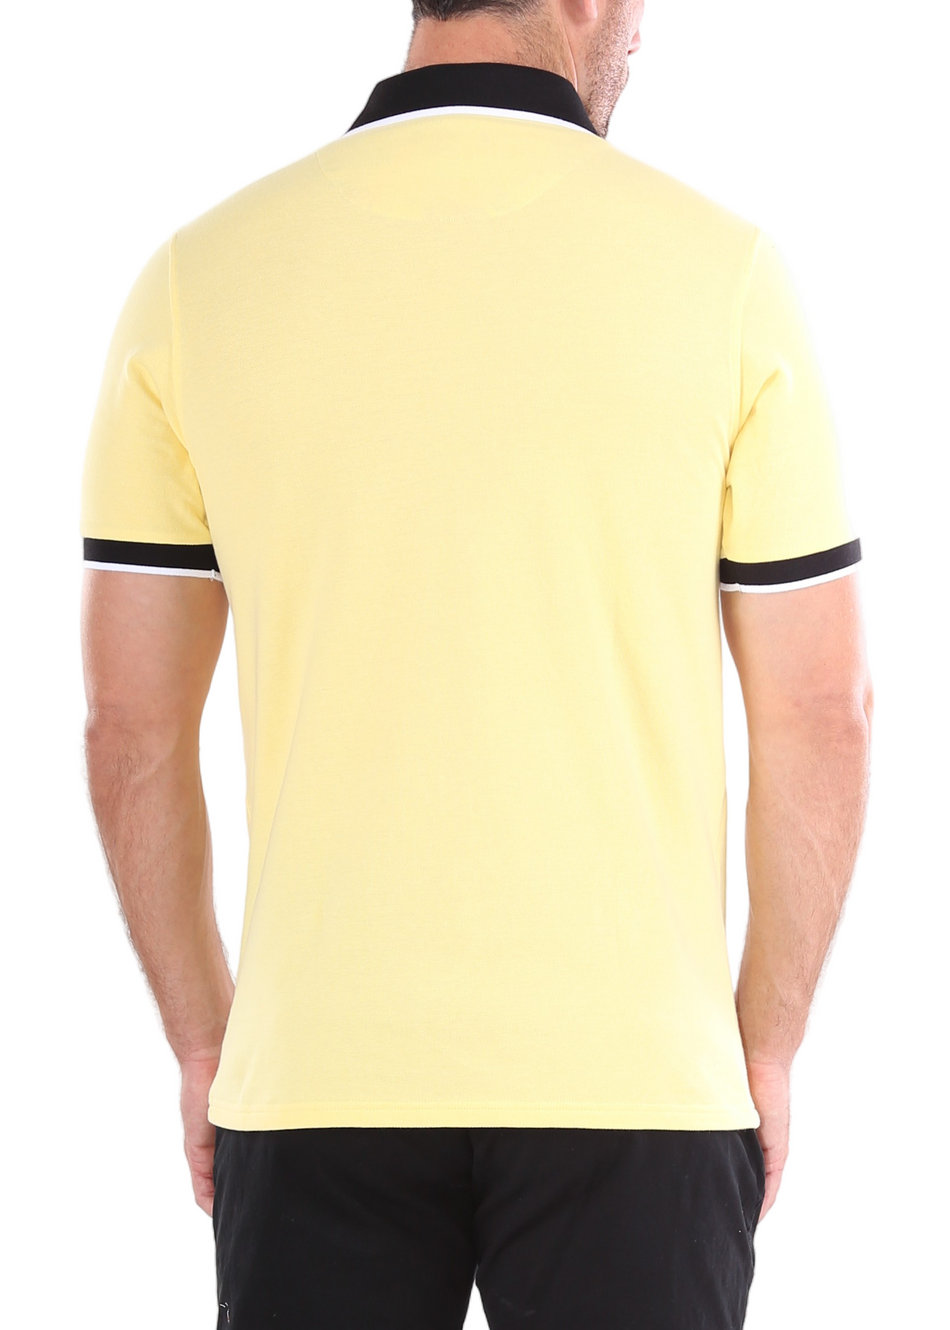 Men's Essentials Short Sleeve Polo Shirt Solid Yellow